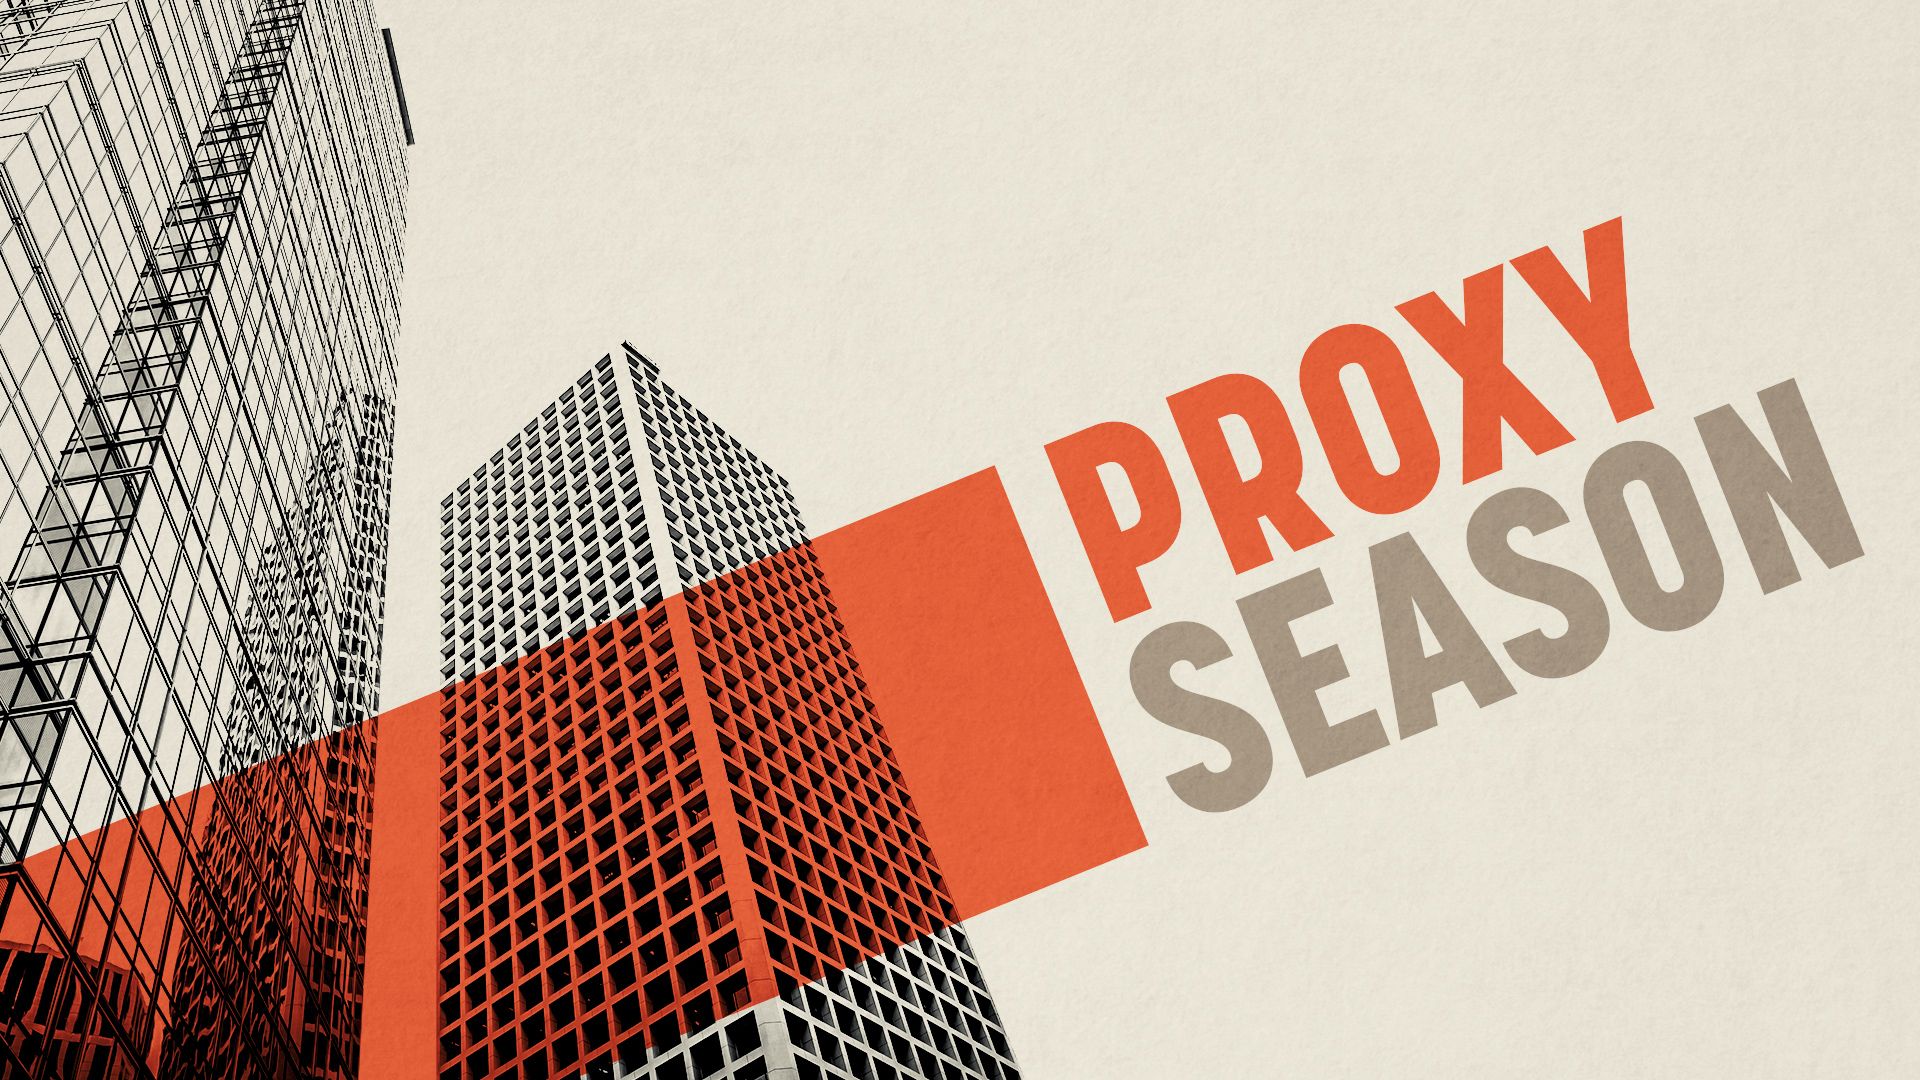 Illustration of high contrast office buildings and the words "Proxy Season."